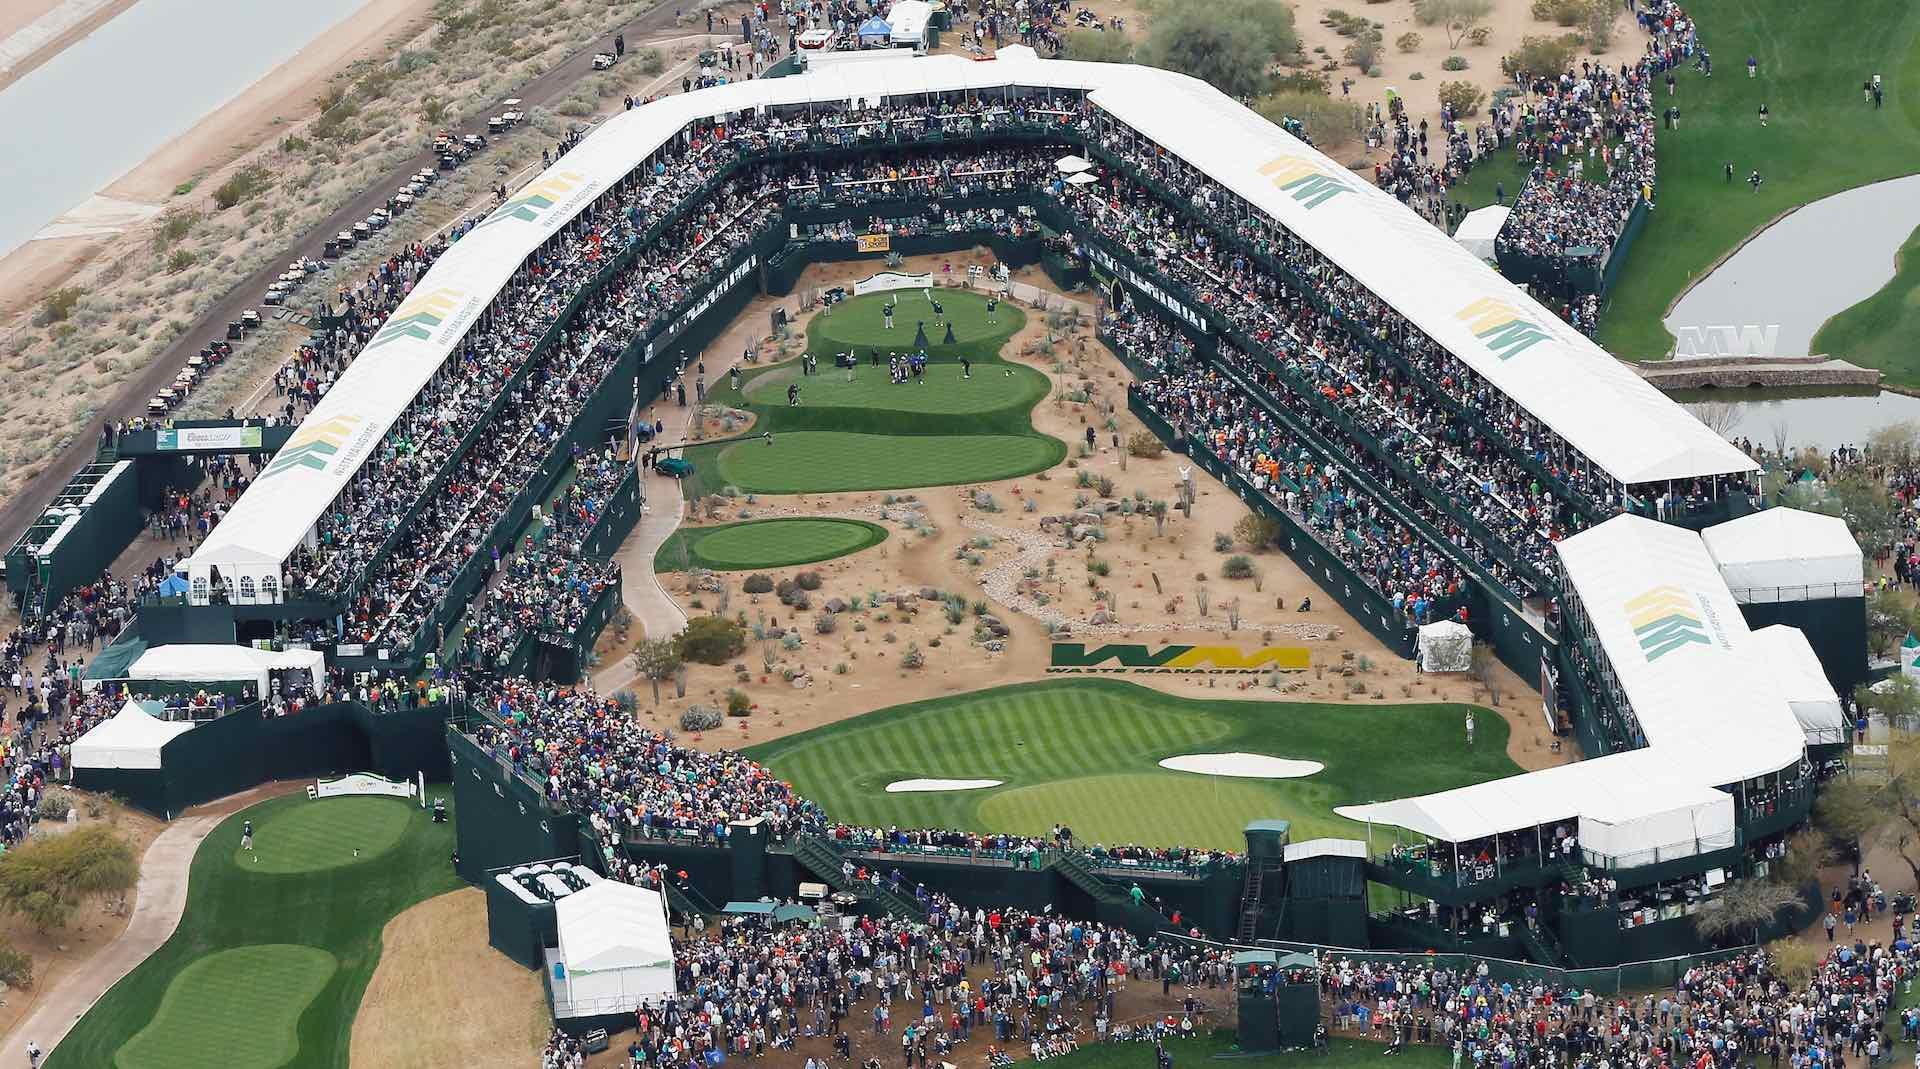 SCOTTSDALE, AZ - JANUARY 31: A large group of fans watch the play around the par-three 16th hole during the third round of the Waste Management Phoenix Open at TPC Scottsdale on January 31, 2015 in Scottsdale, Arizona. (Photo by Scott Halleran/Getty Images)